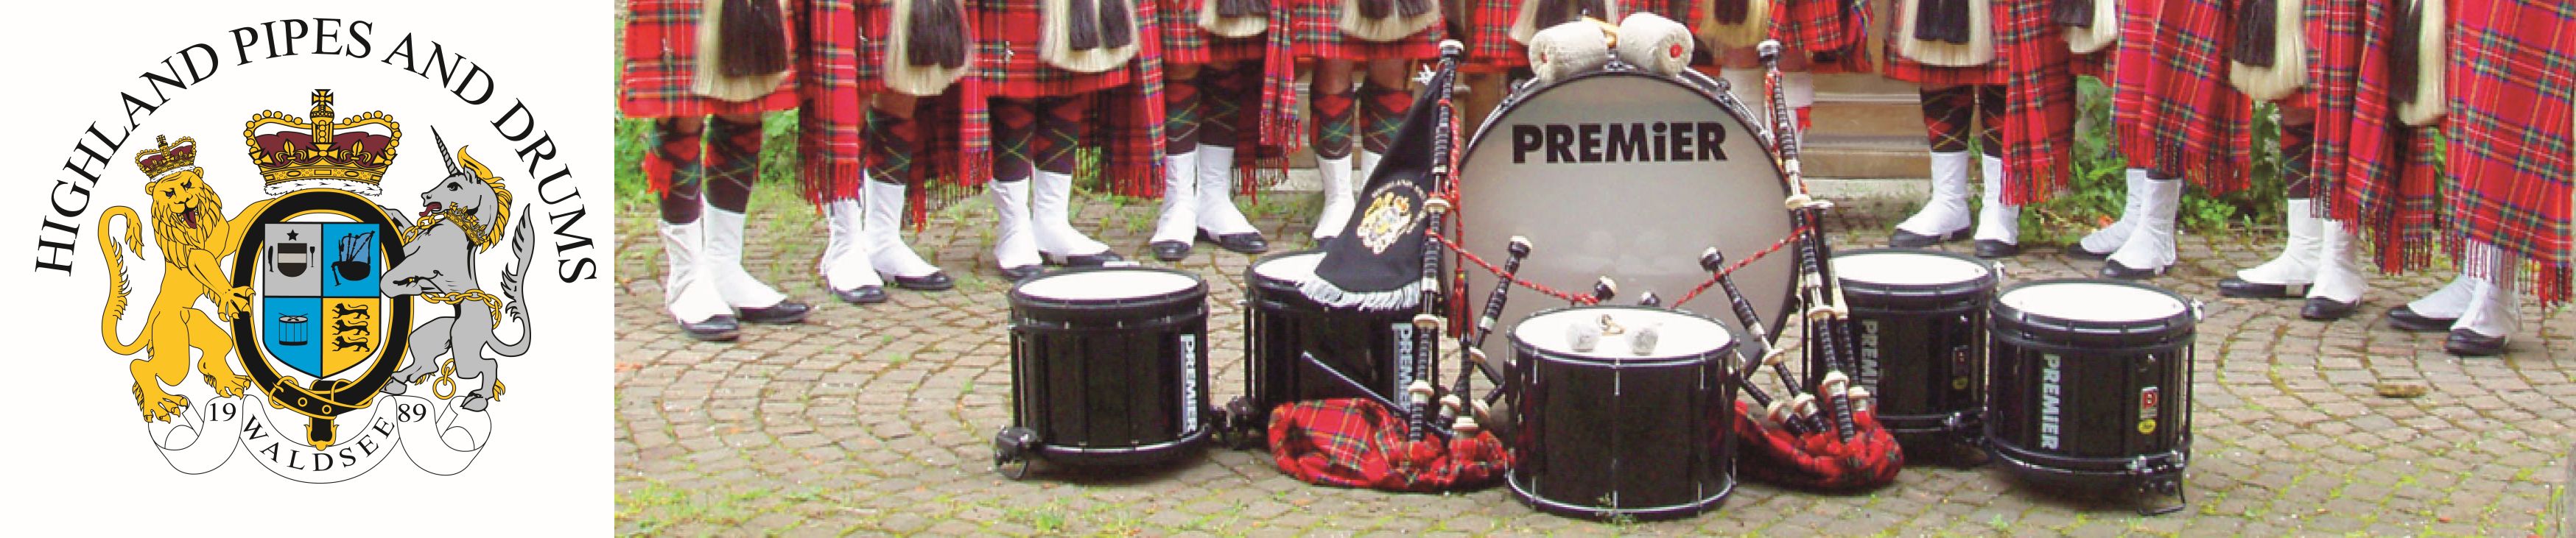 Highland Pipes and Drums of Waldsee e.V.